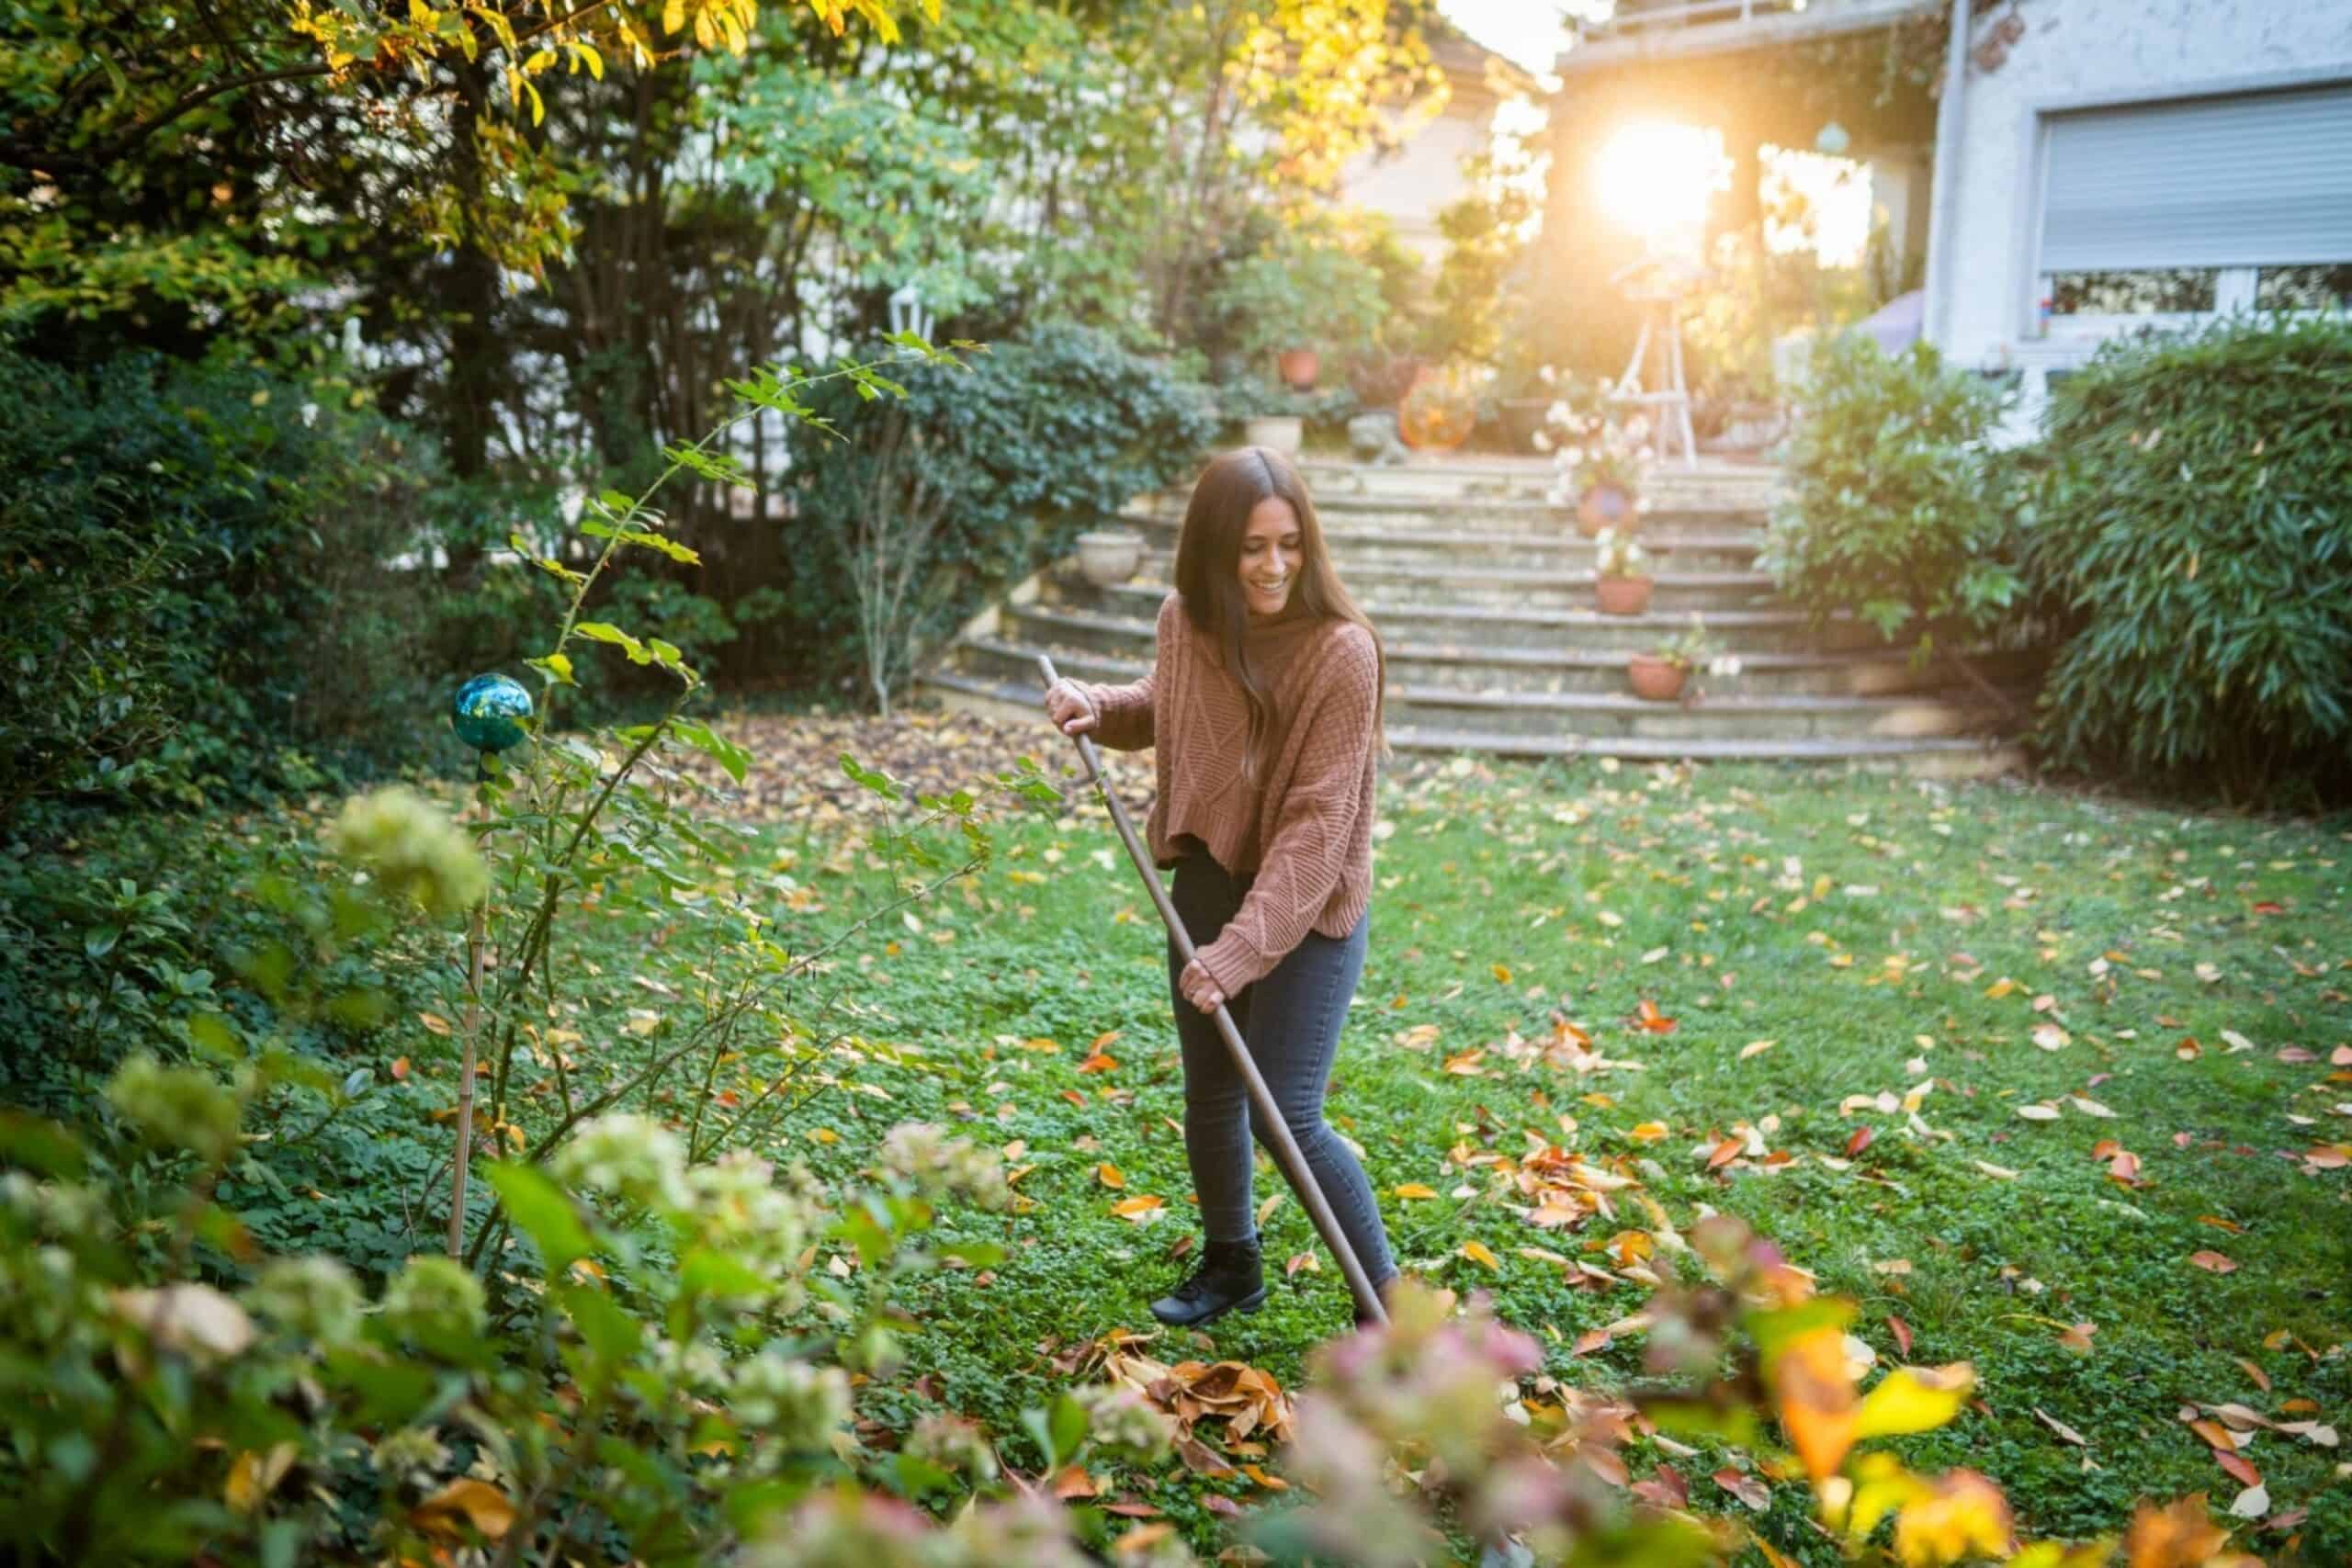  woman sweeping garden with broom in back yard